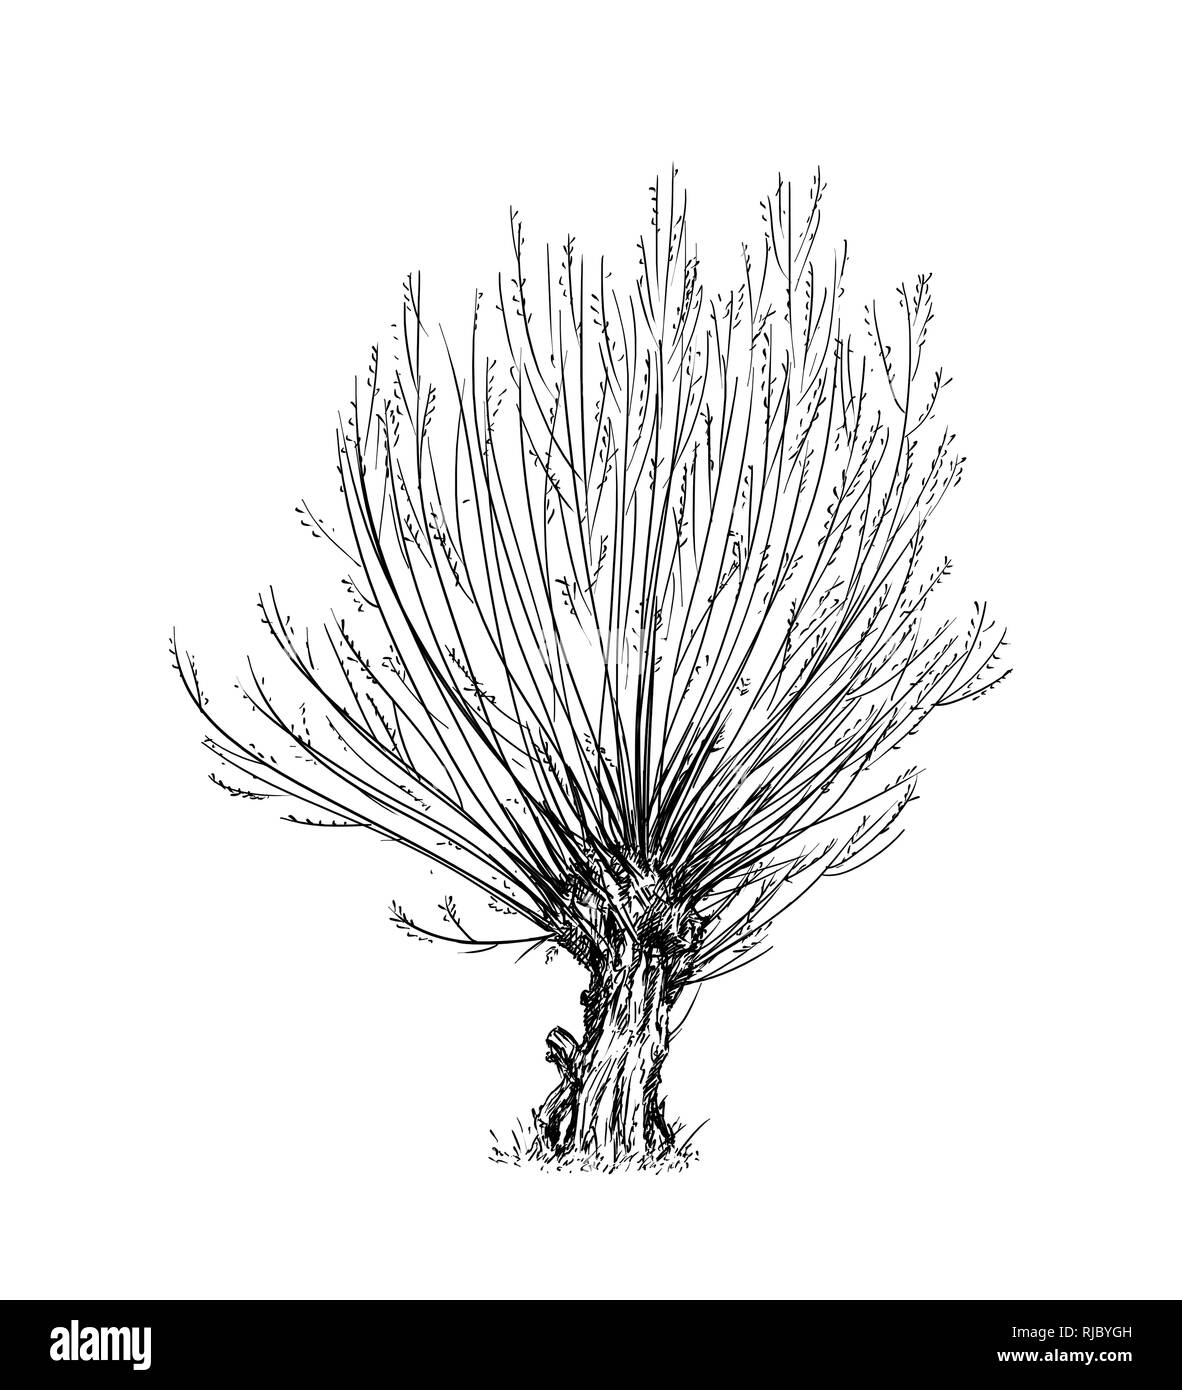 Cartoon Drawing of Willow or Sallow Tree Stock Photo